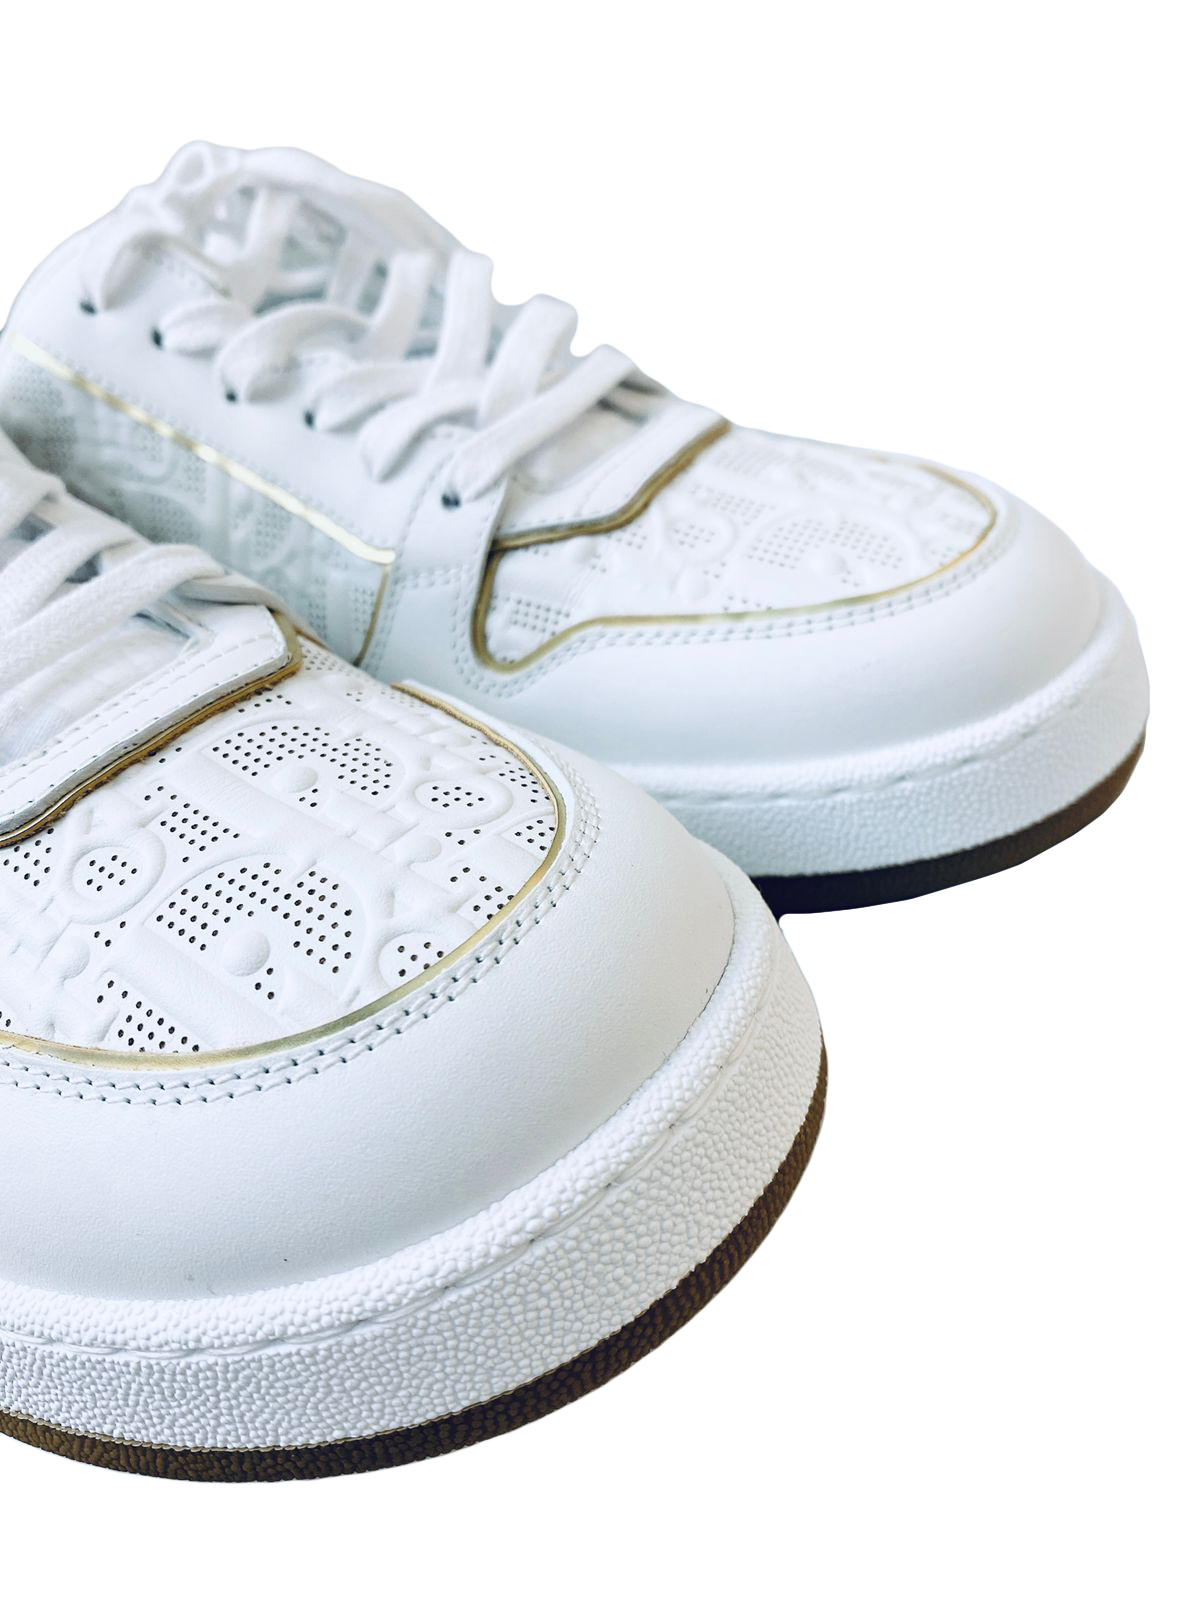 WHITE AND GOLD DIOR OBLIQUE PERFORATED CALFSKIN LEATHER ONE SNEAKERS ...